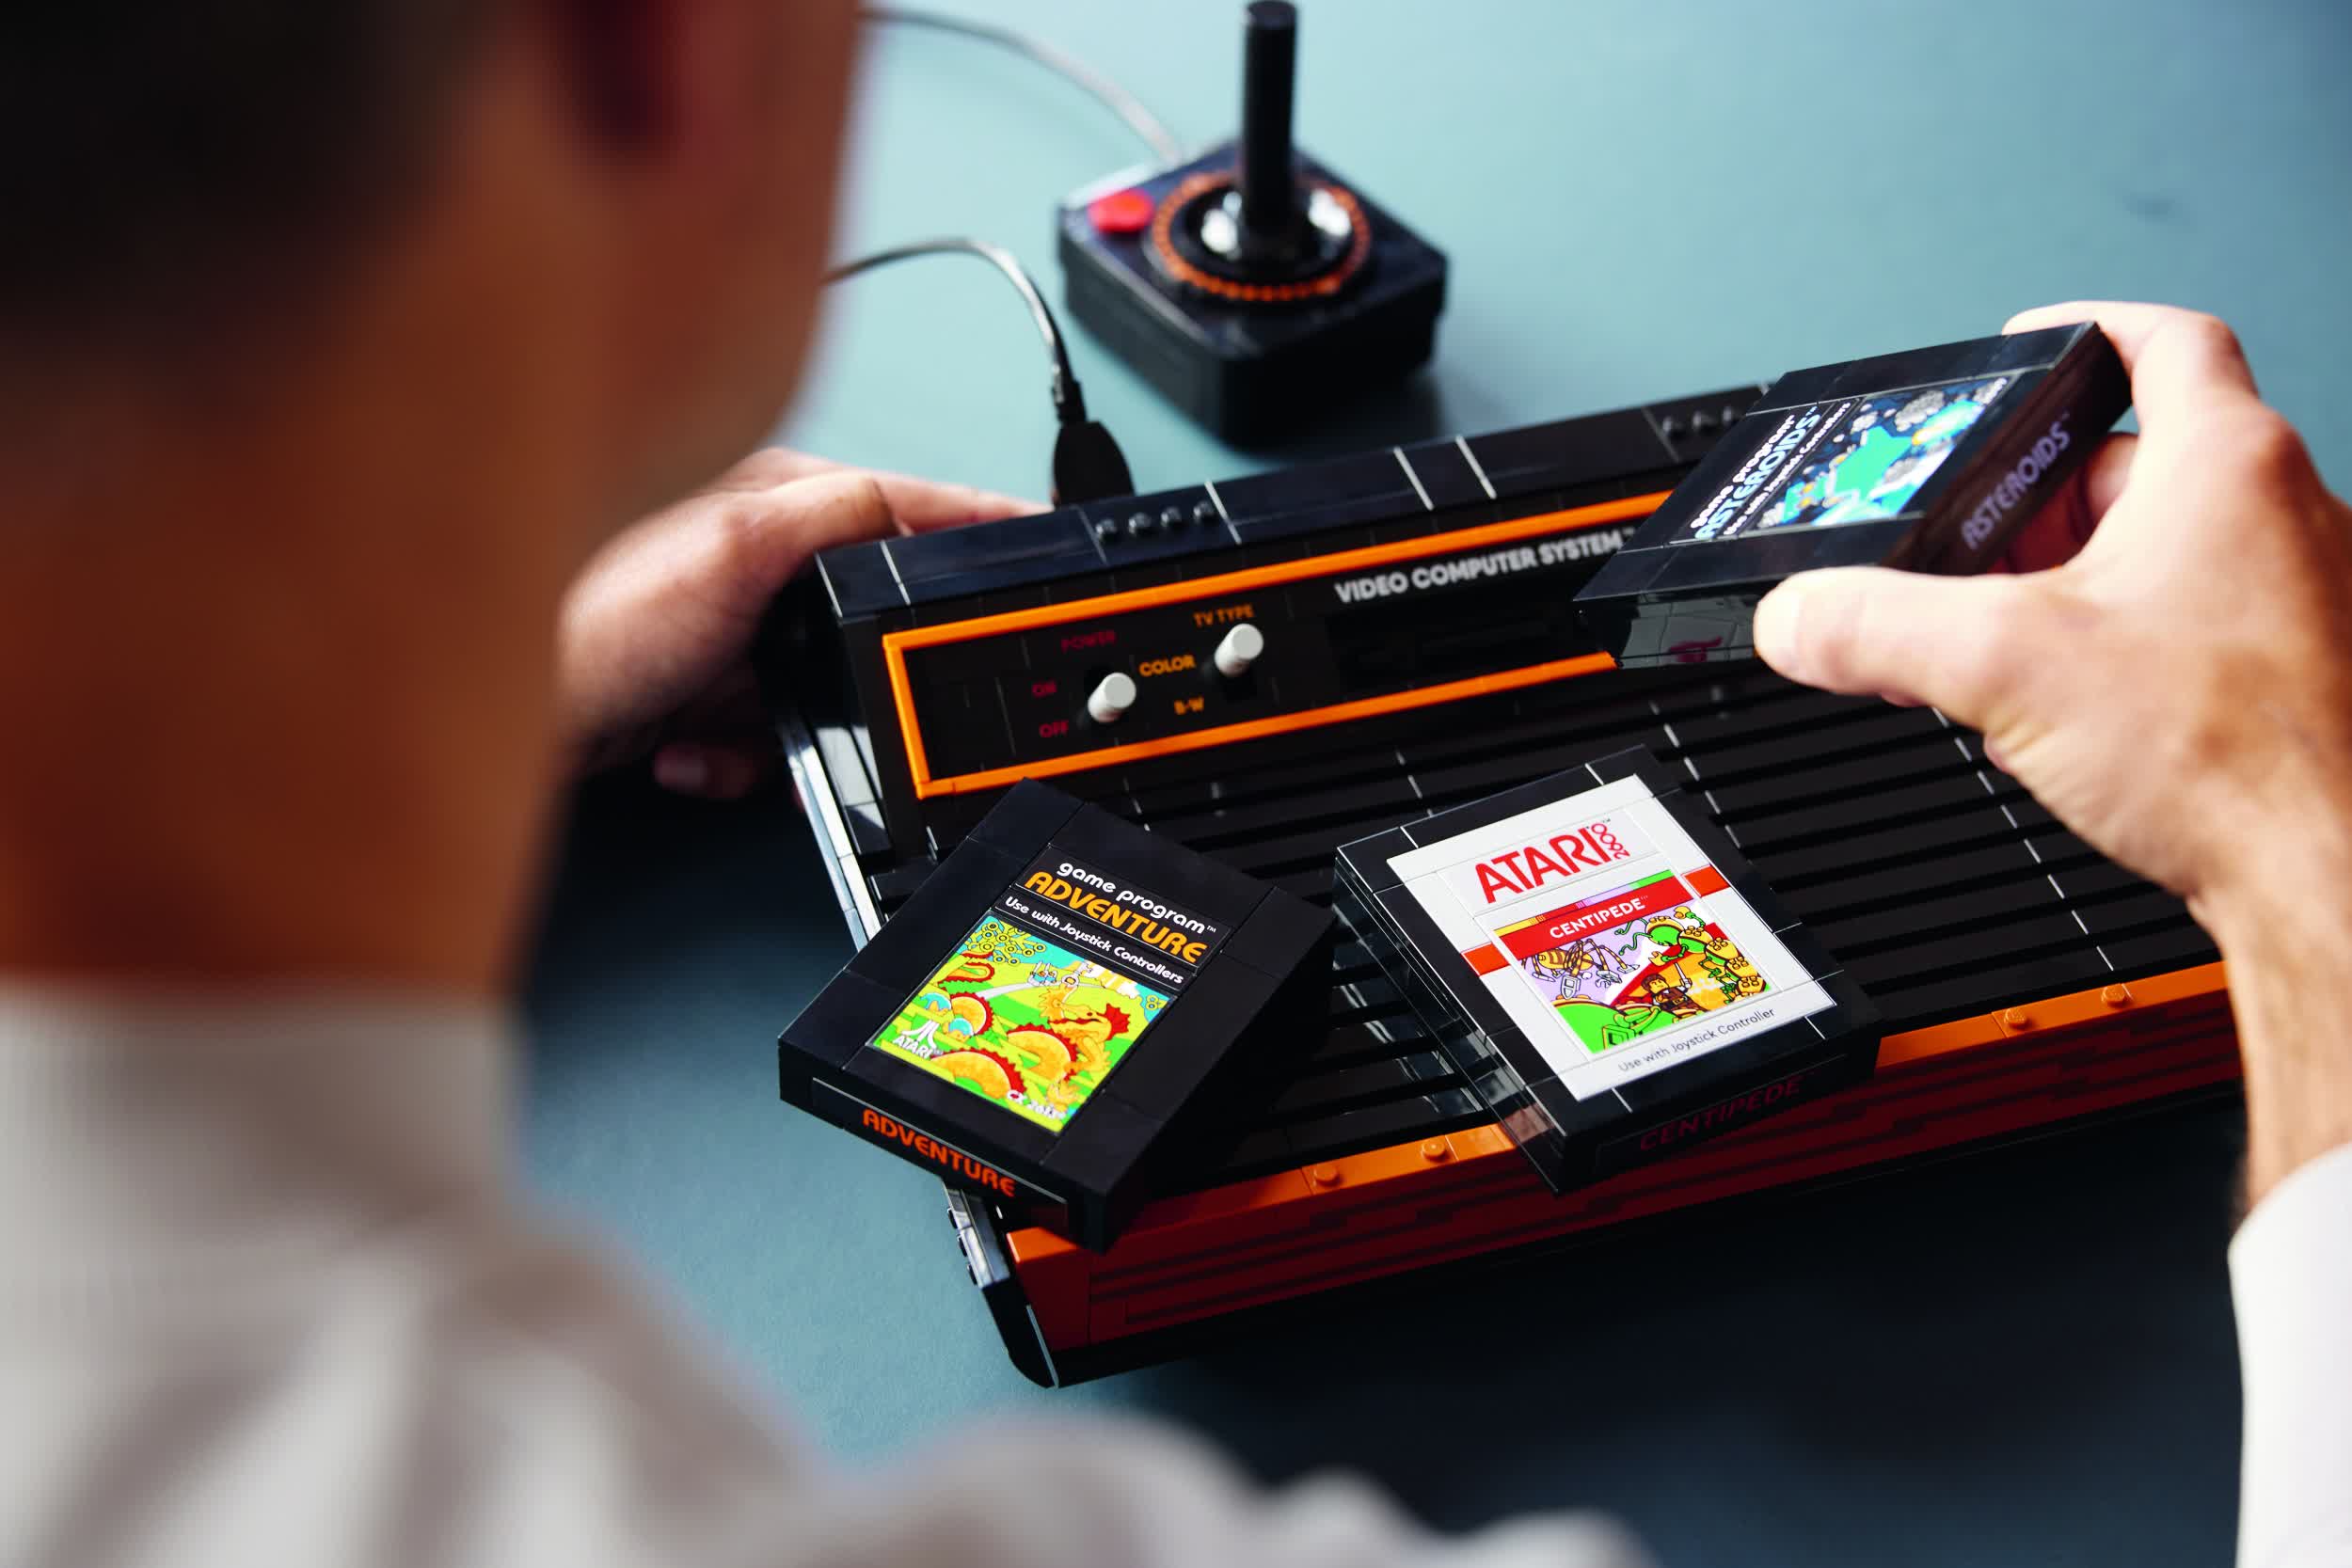 Lego's Atari 2600 set with hidden diorama launches August 1